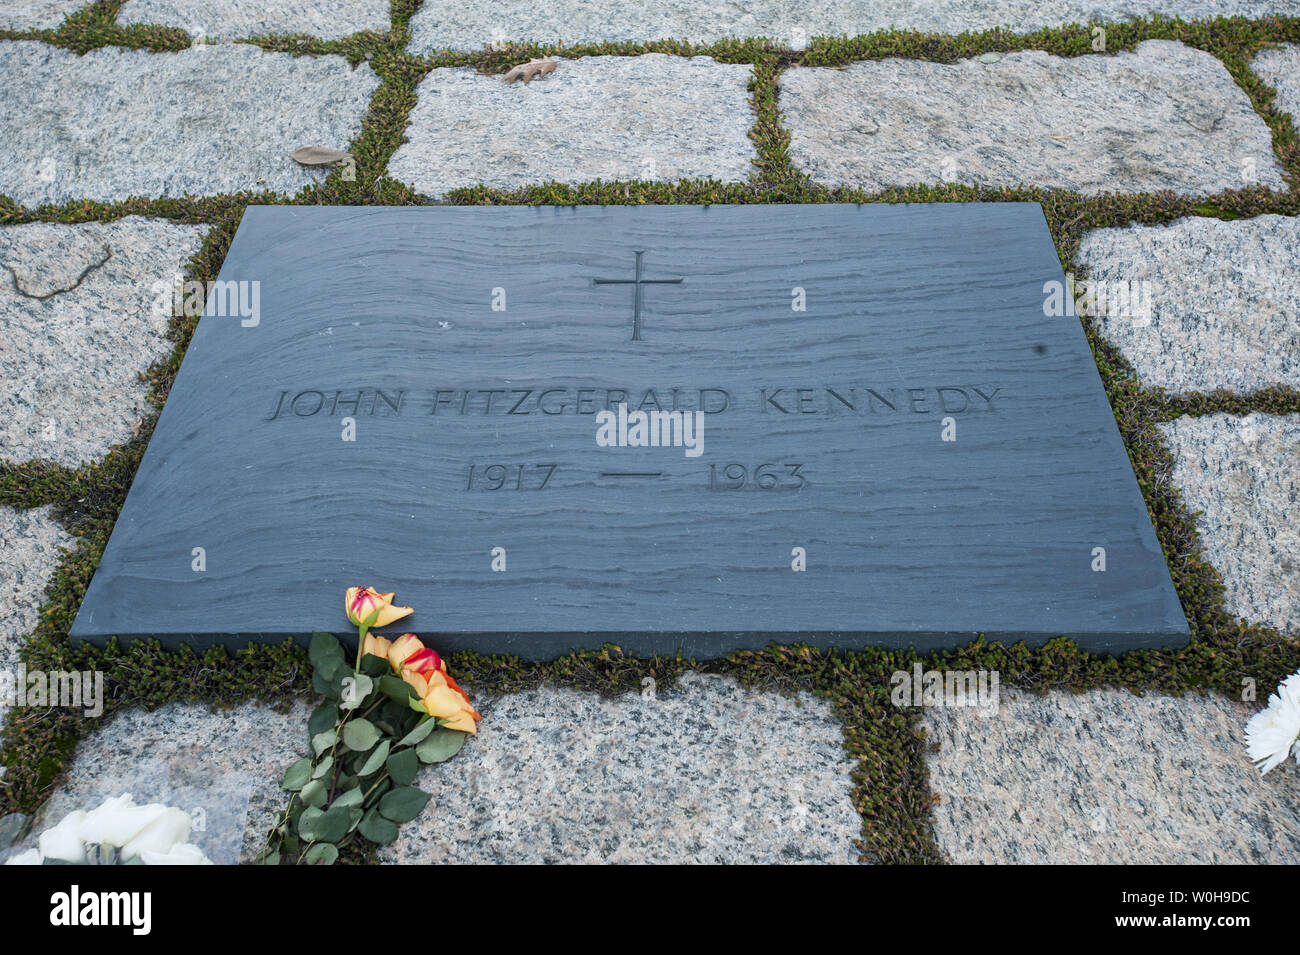 Flowers lay beside the  grave of President John Fitzgerald Kennedy at Arlington National Cemetery in Arlington, Virginia on November 18, 2013.  Kennedy was the 35th president of the United States and November 22nd will mark the 50th Anniversary of his assassination in Dallas, Texas.    UPI/Pat Benic Stock Photo